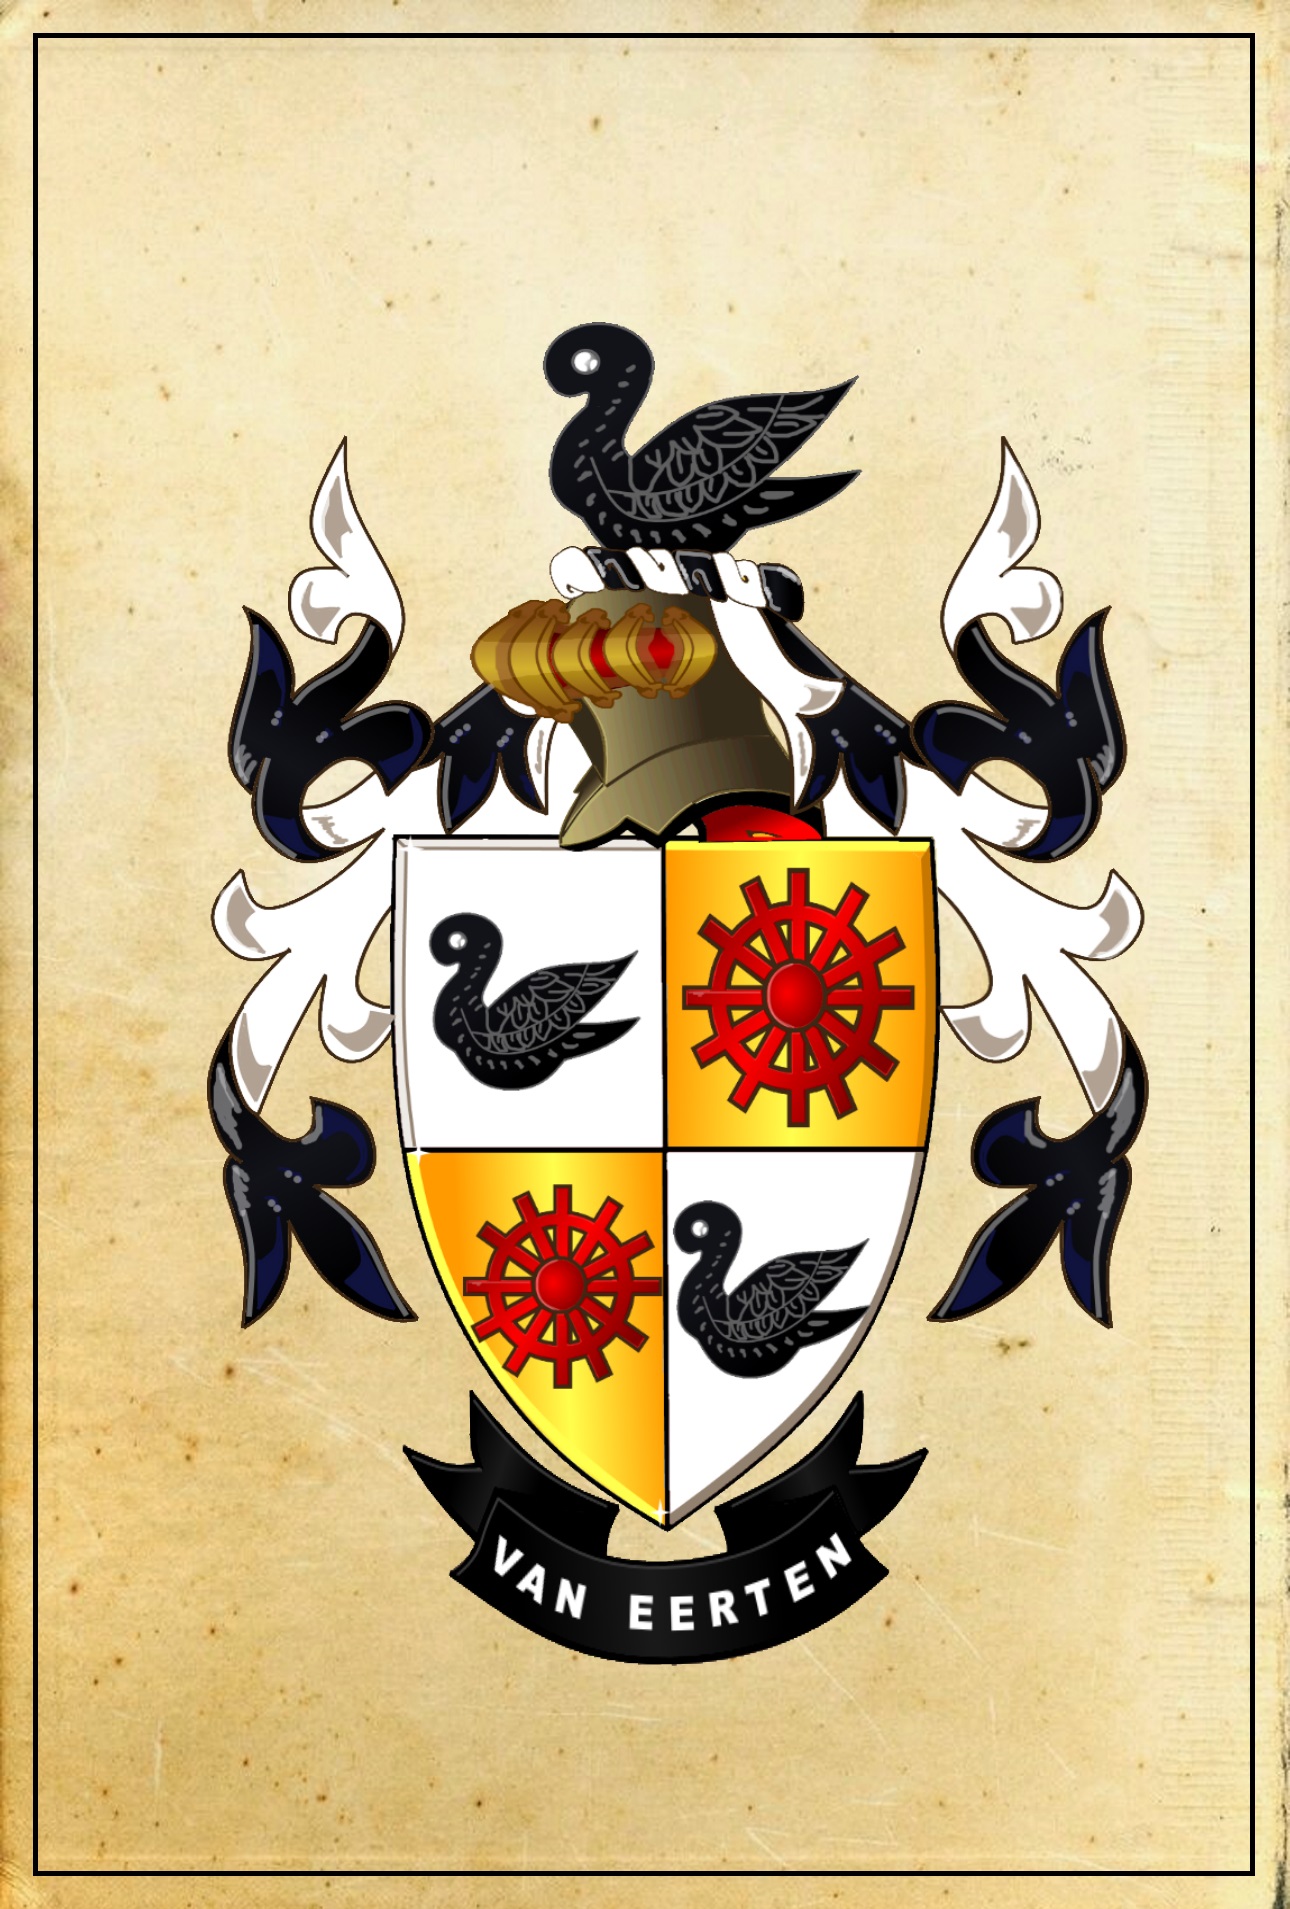 Coat of arms no 400 reworked from an old Afrikaans publication!